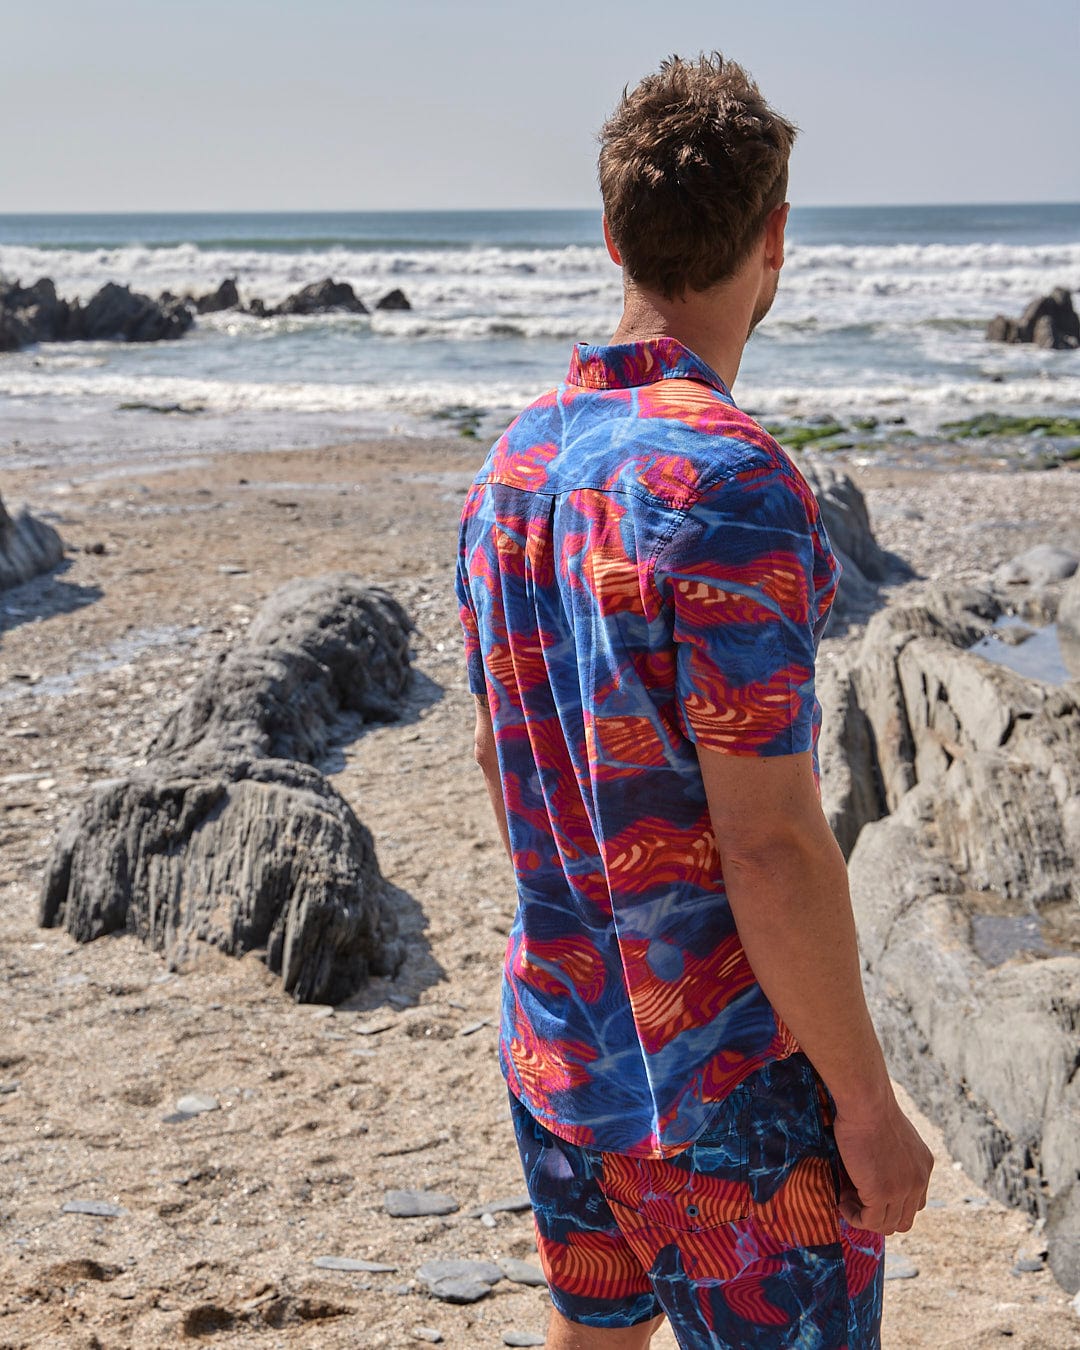 A man standing on a beach wearing a Saltrock Poolside - Mens Short Sleeve Shirt, a bright and fun style, made of lightweight fabric.